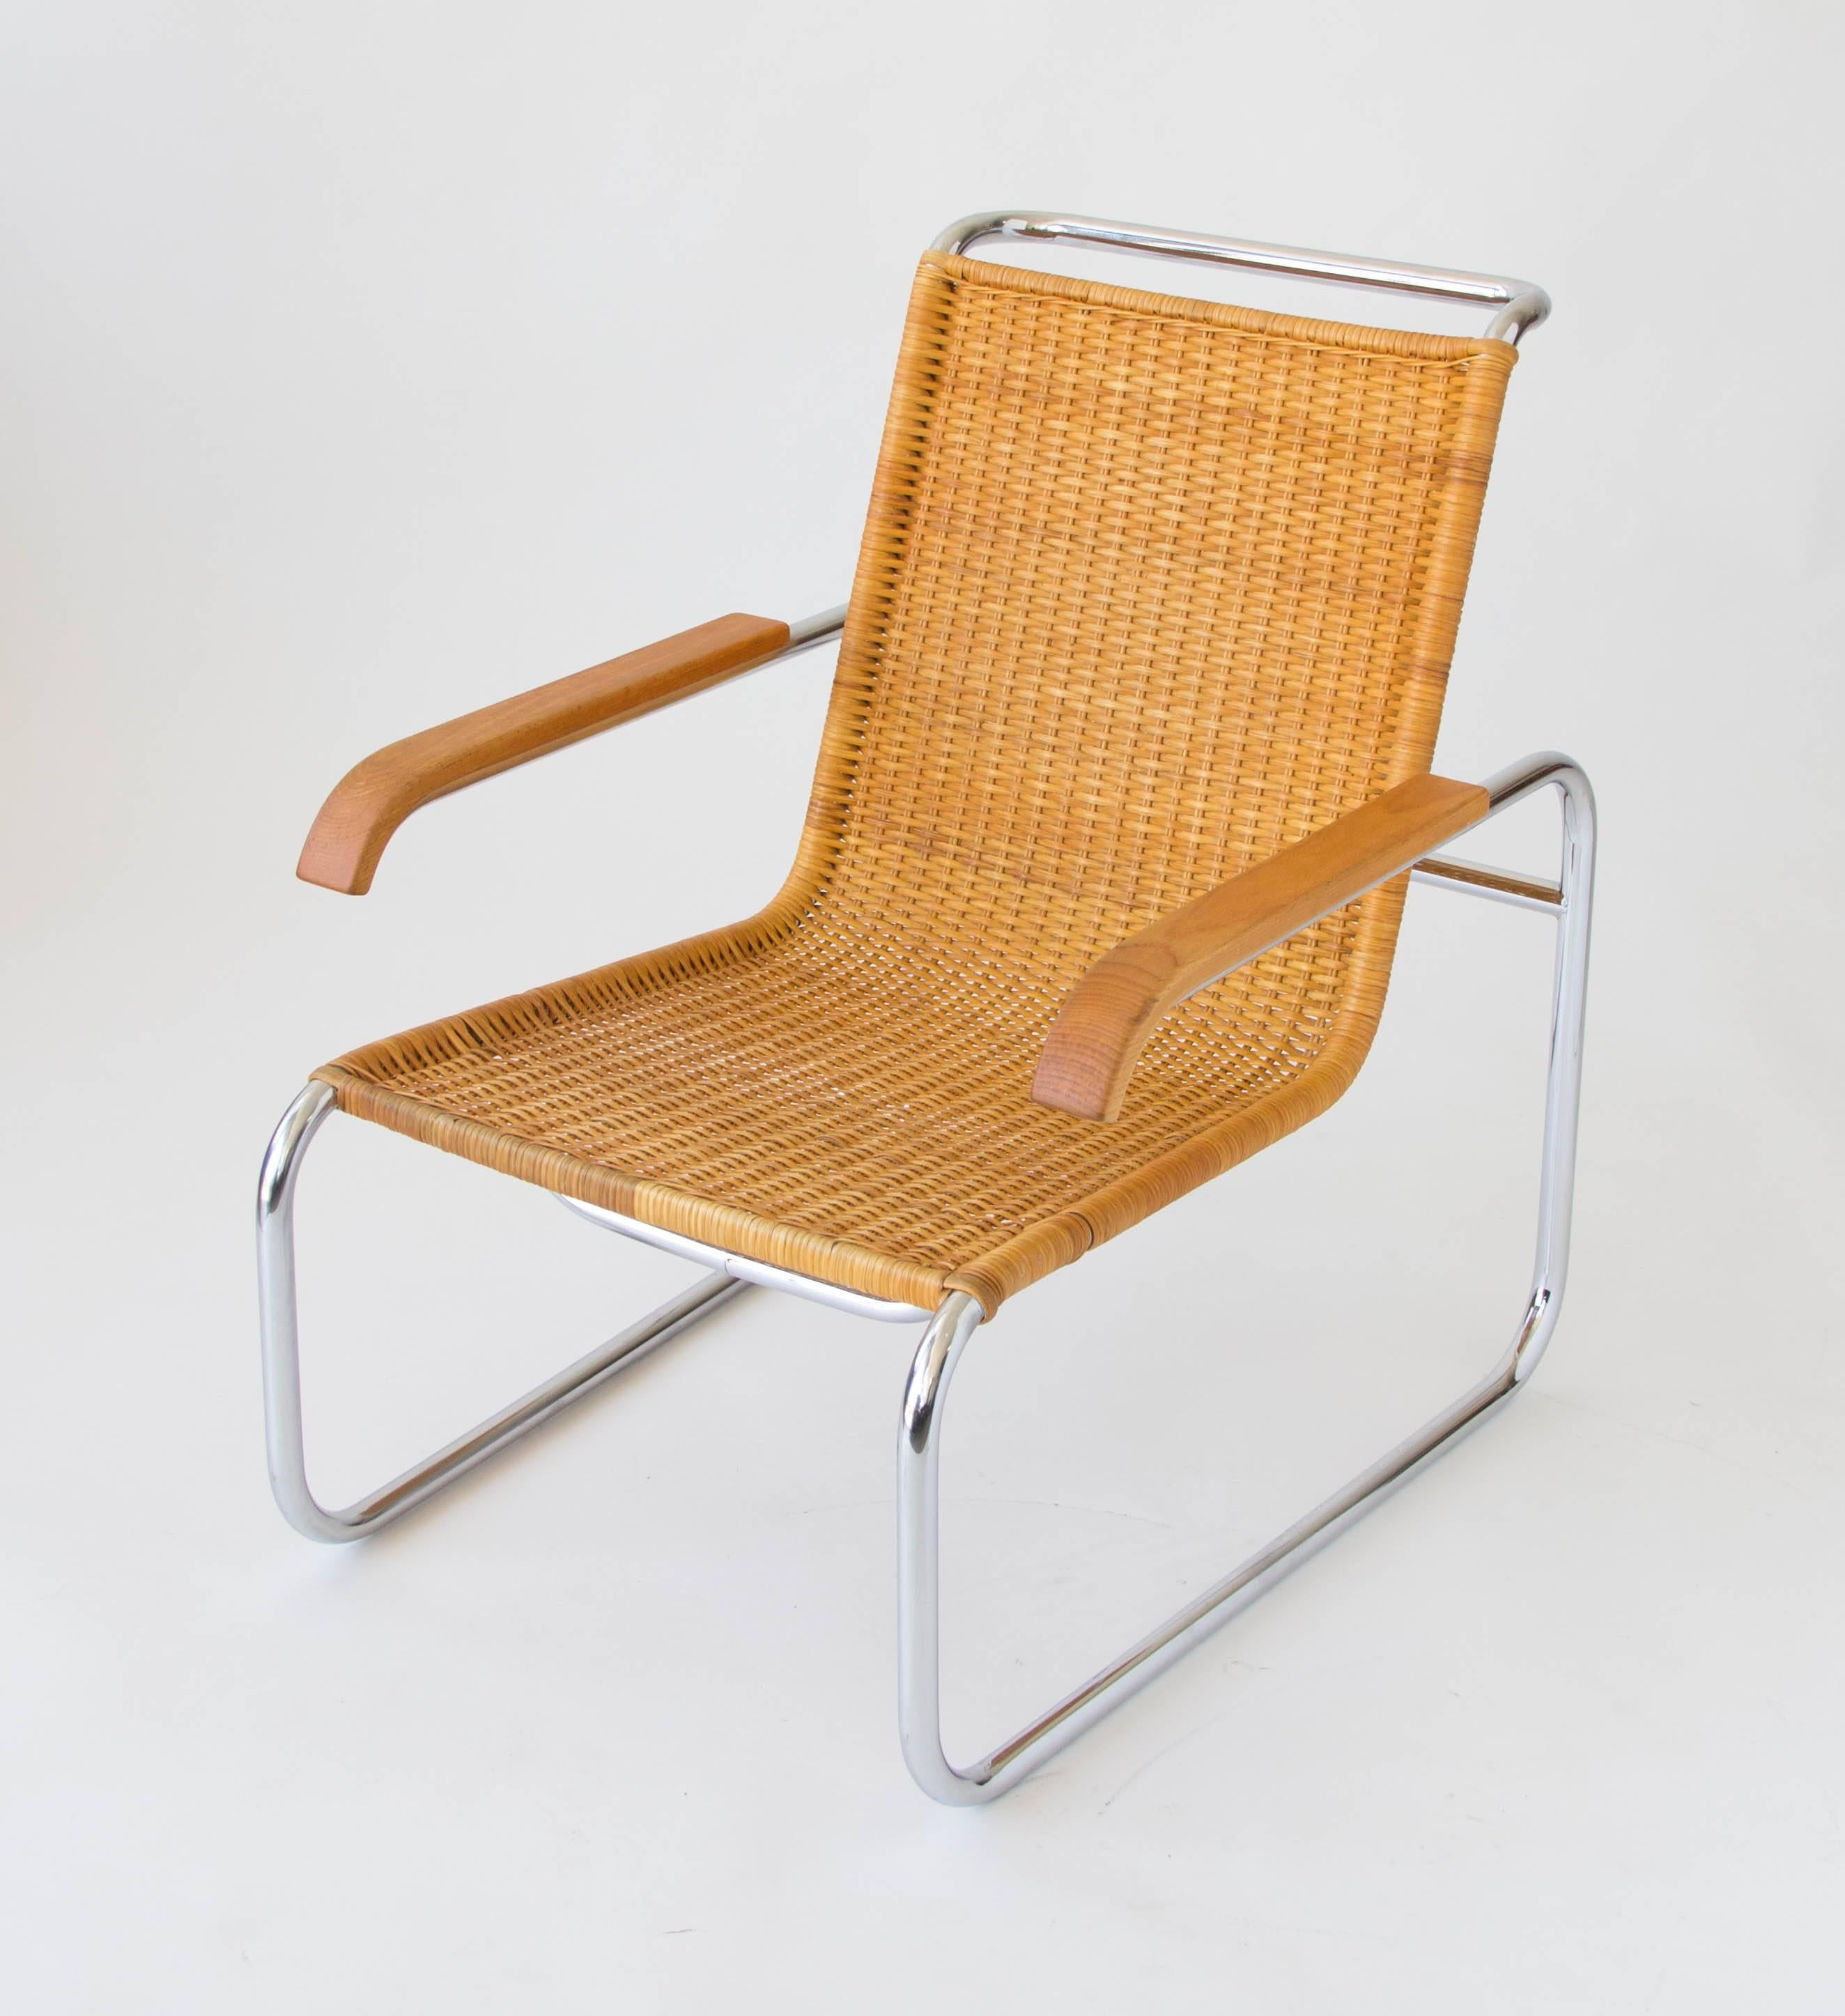 An original Marcel Breuer B35 lounge chair. Designed in 1928 and produced by German manufacturer Thonet, this example has a woven rattan seat. Other variants have included leather cushion or sling upholstery. The seat 'floats' in a chrome frame with